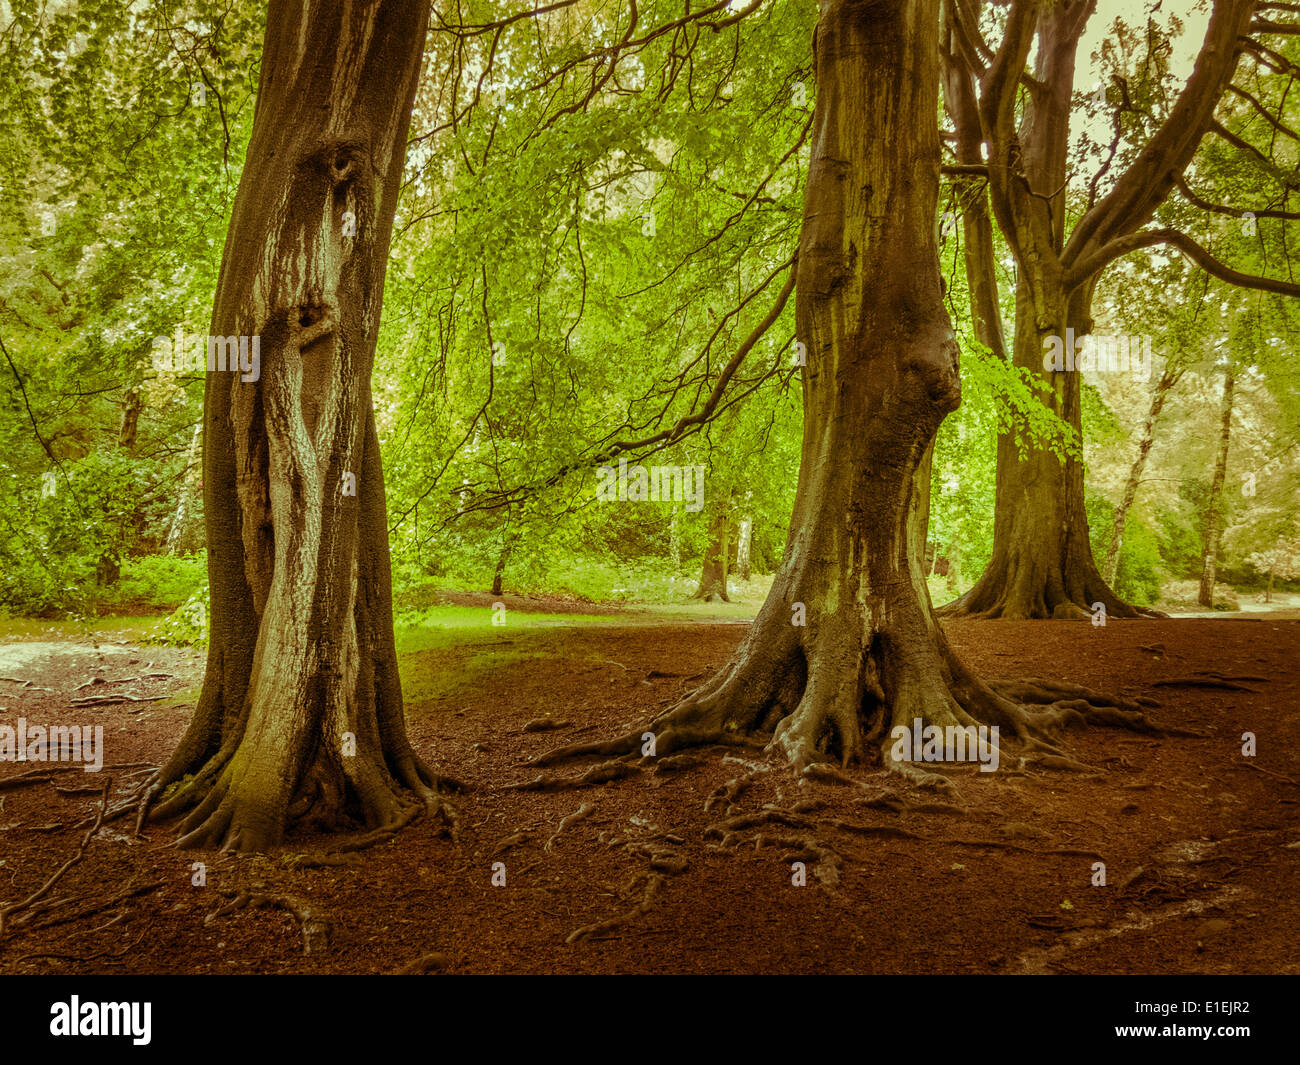 Mysterious looking trees in the woods Stock Photo